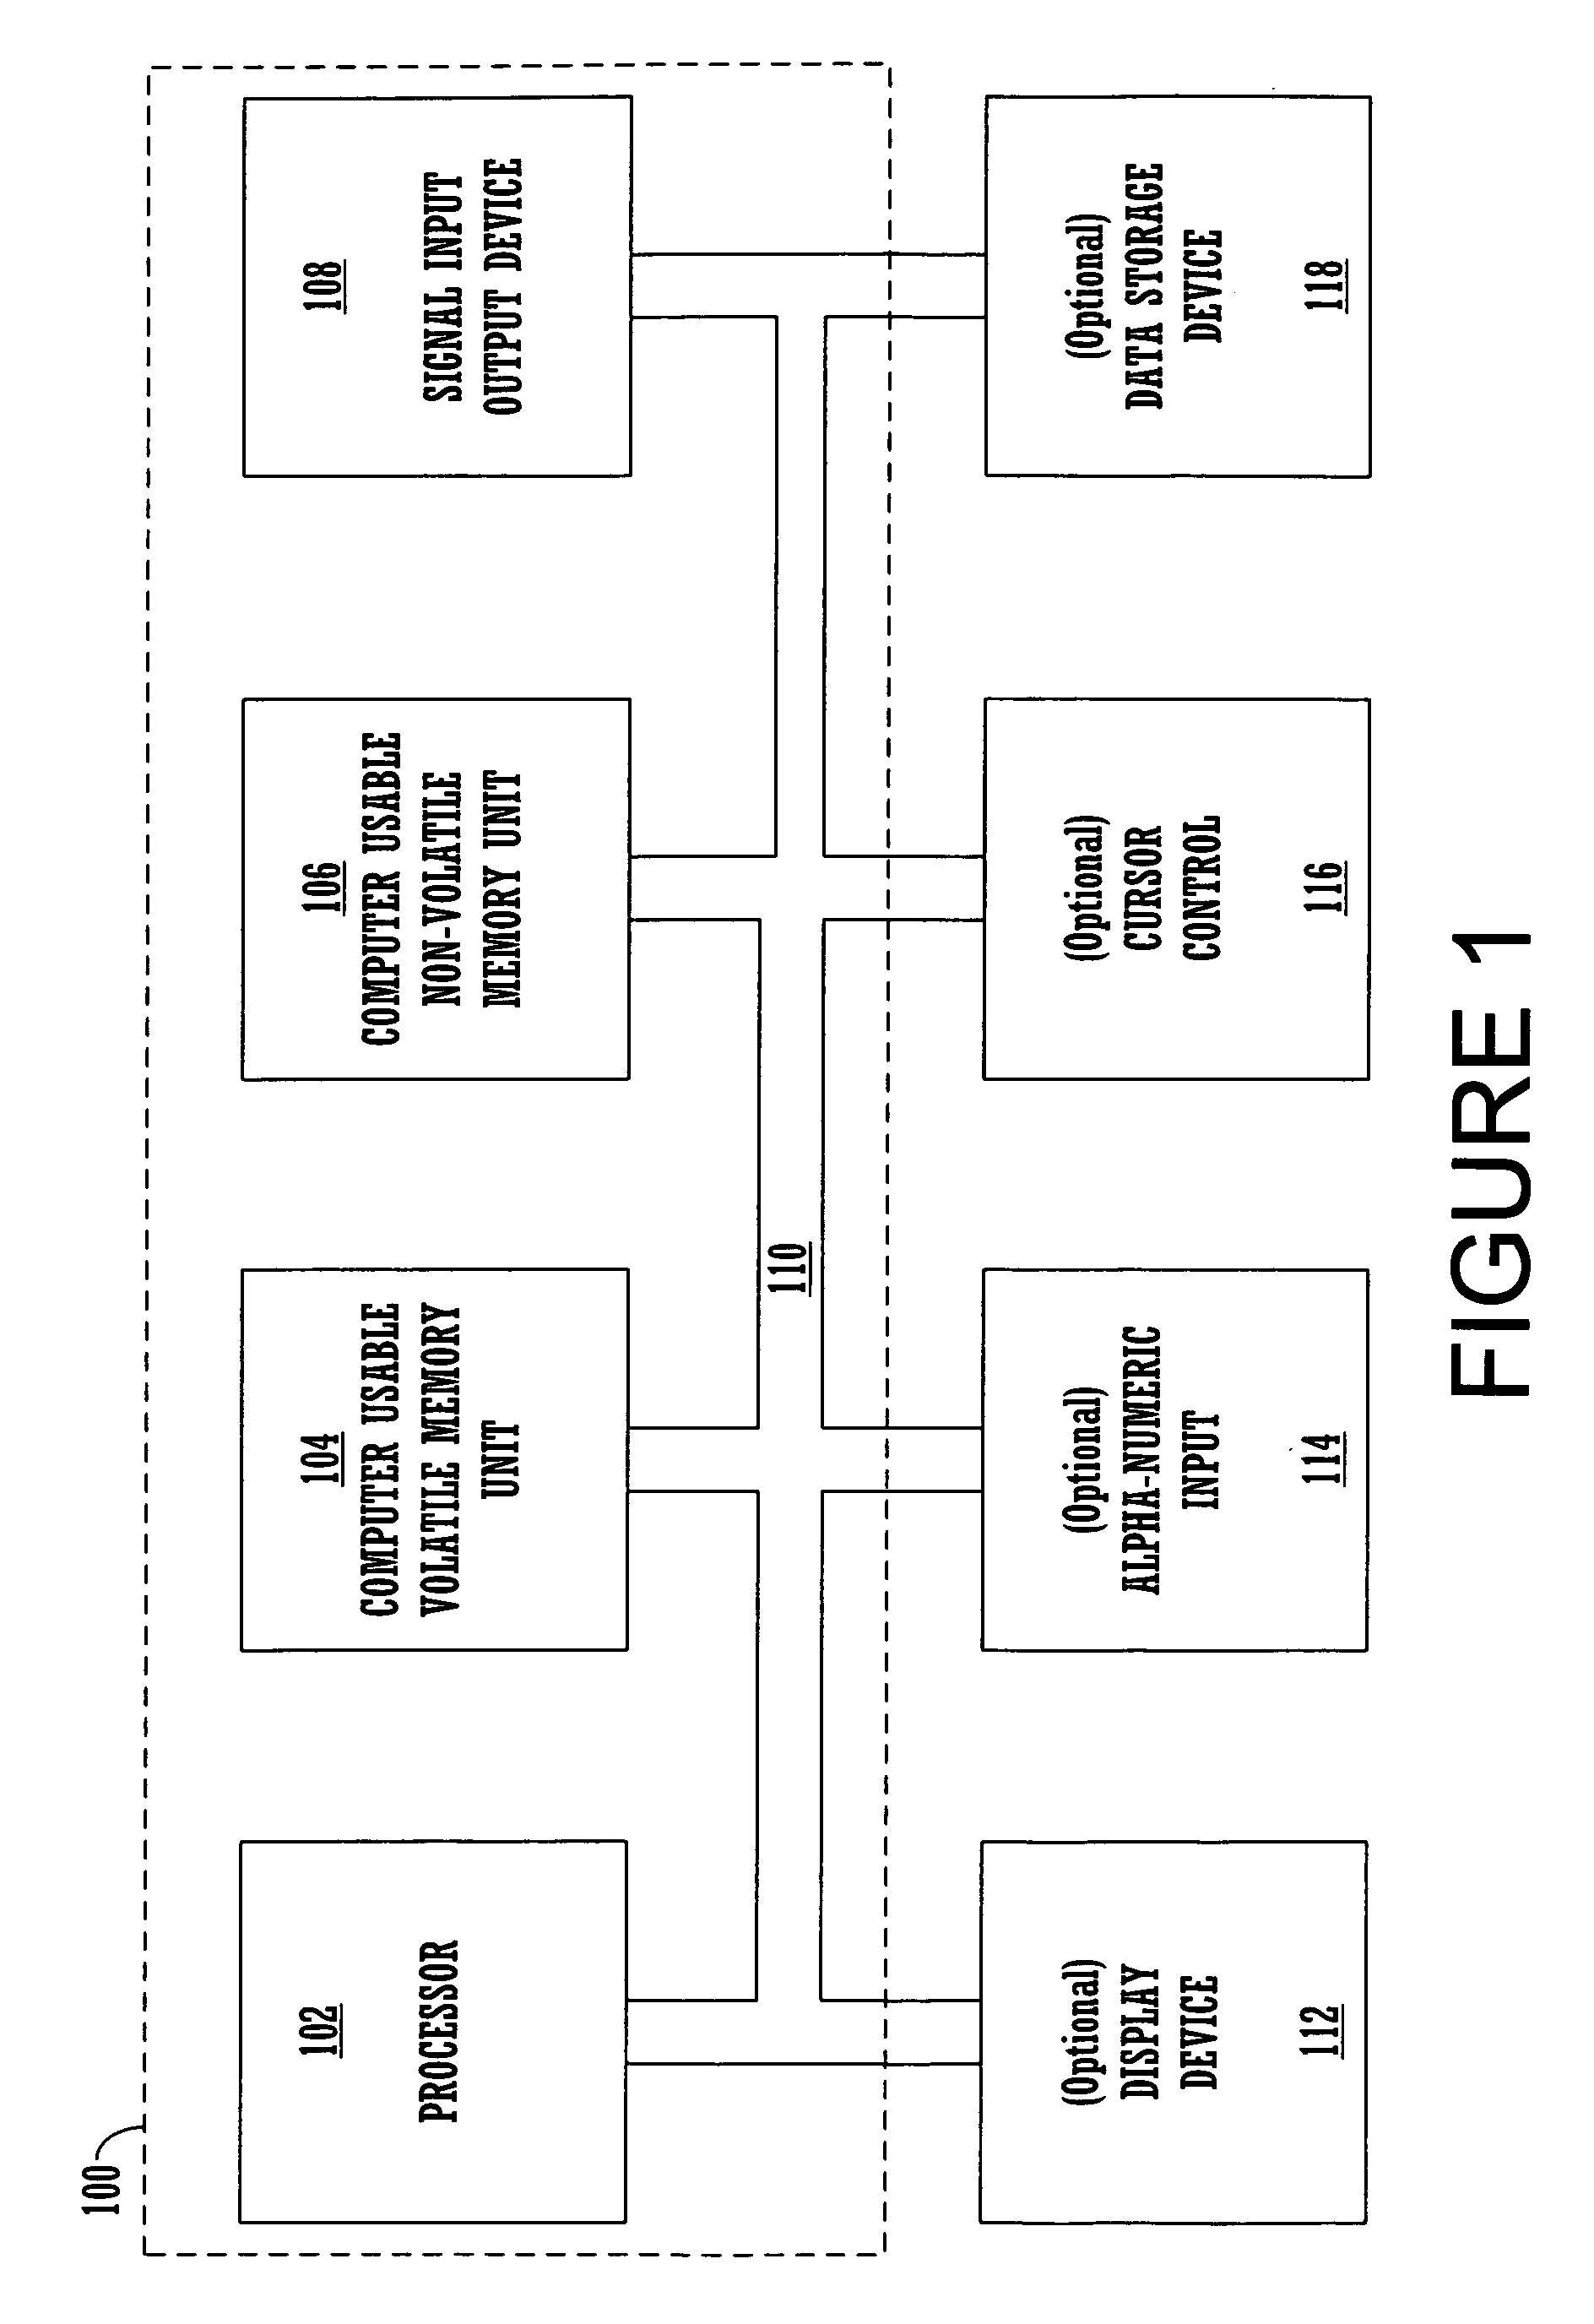 Method and system for debugging through supervisory operating codes and self modifying codes